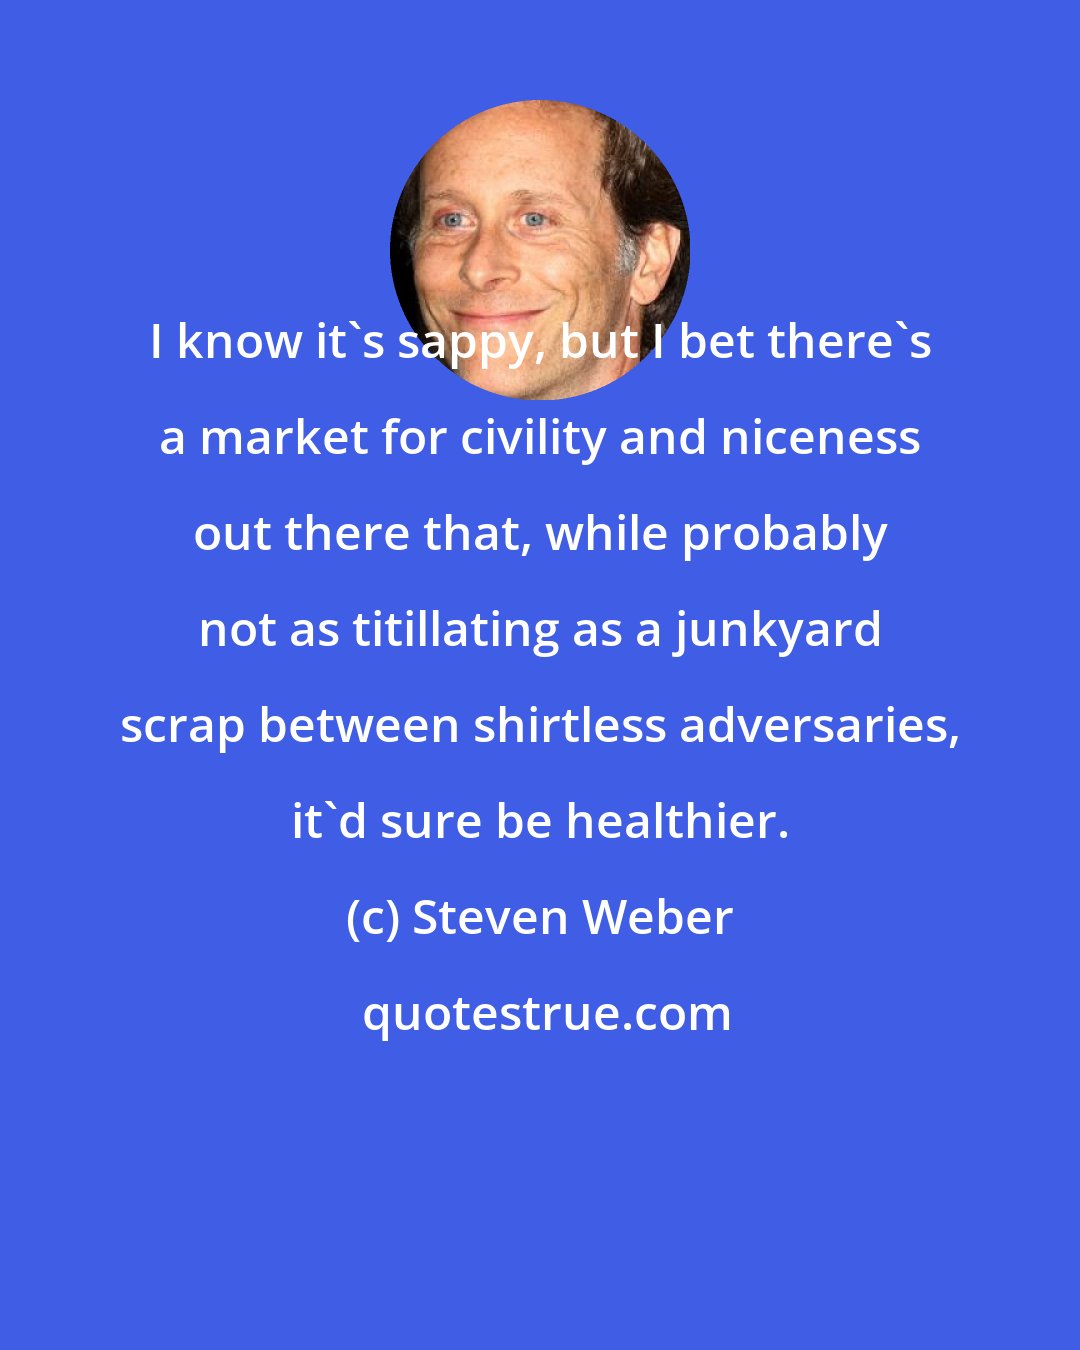 Steven Weber: I know it's sappy, but I bet there's a market for civility and niceness out there that, while probably not as titillating as a junkyard scrap between shirtless adversaries, it'd sure be healthier.